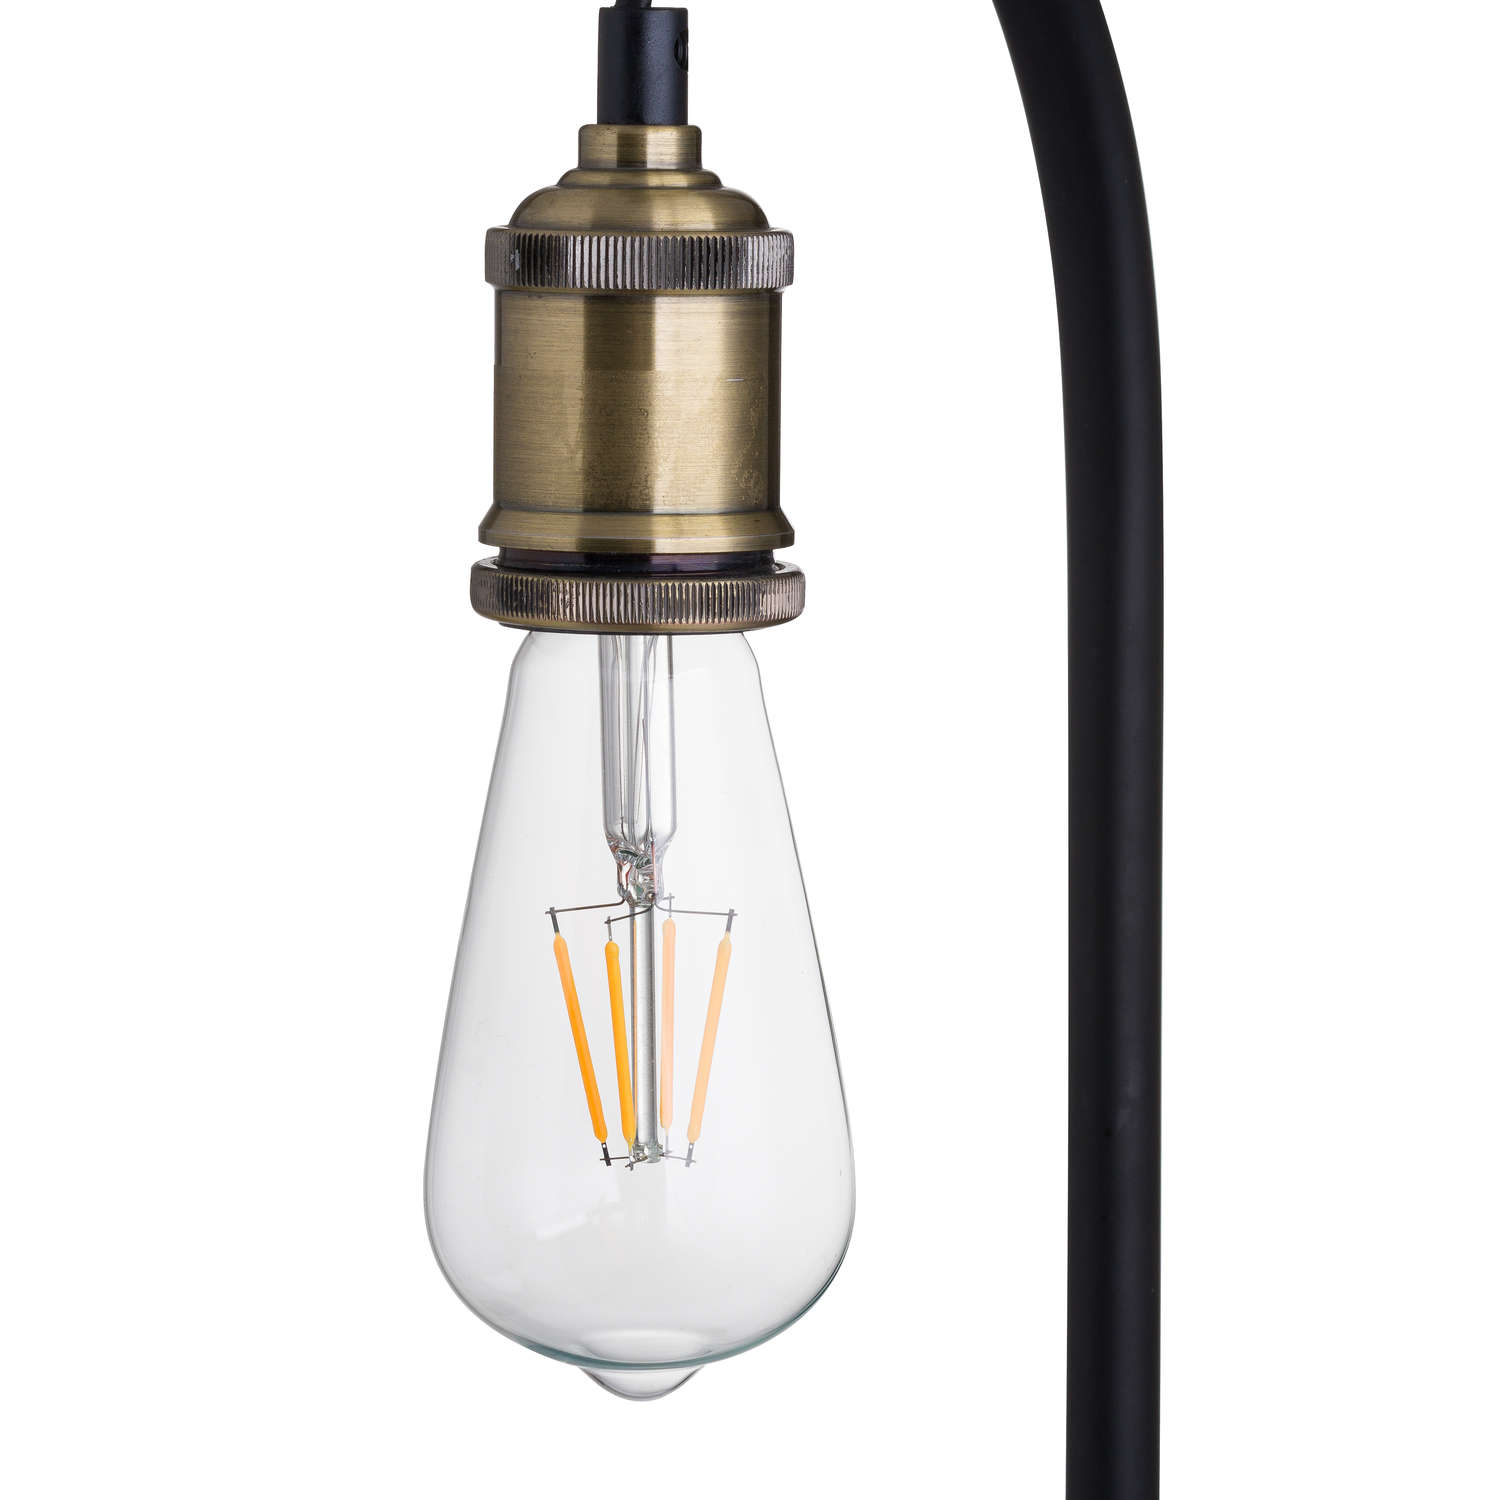 Industrial Black And Brass Desk Lamp Inc Bulb - Image 2